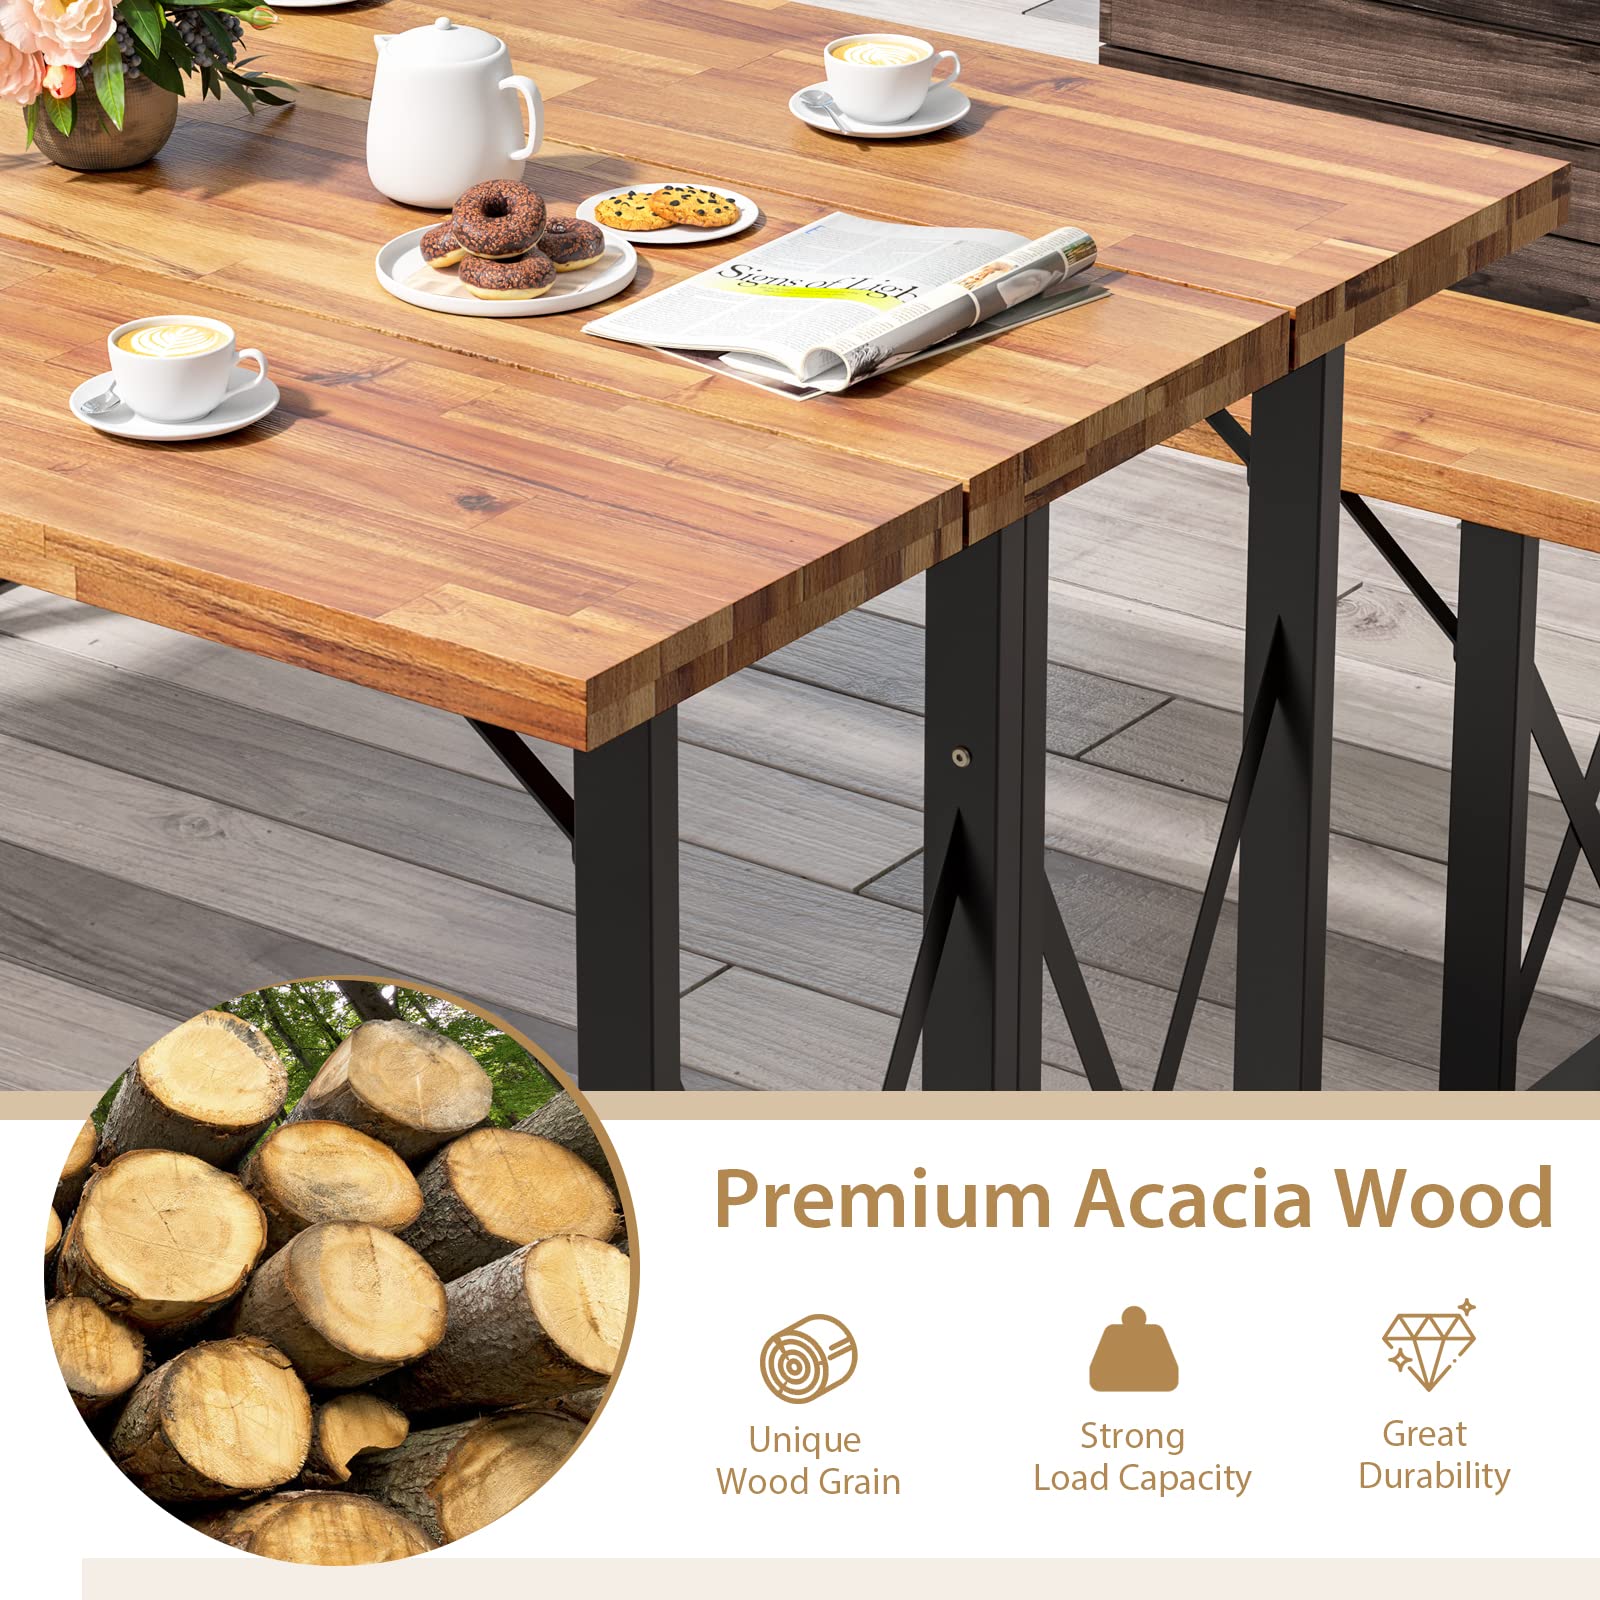 Giantex Outdoor Picnic Table Set with 2 Benches, Acacia Wood Patio Dining Table Set for 6 or 4 Persons, with 2” Umbrella Hole